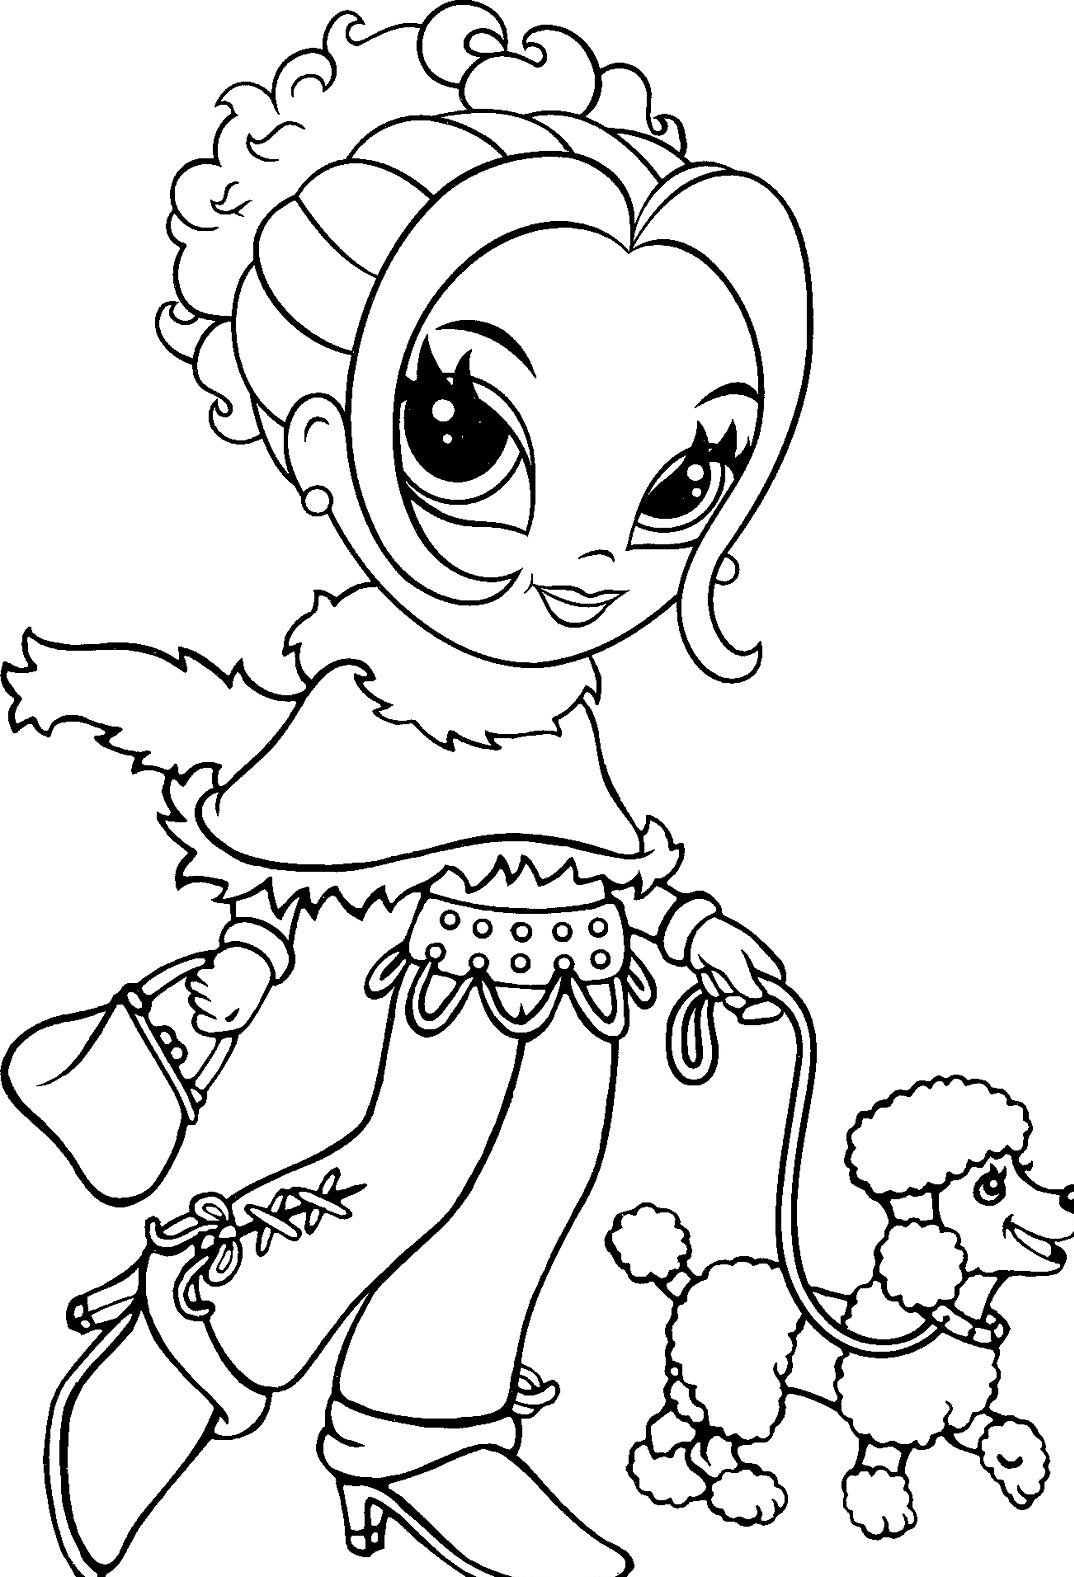 lisa frank printable coloring pages lisa frank coloring pages to download and print for free frank lisa pages coloring printable 